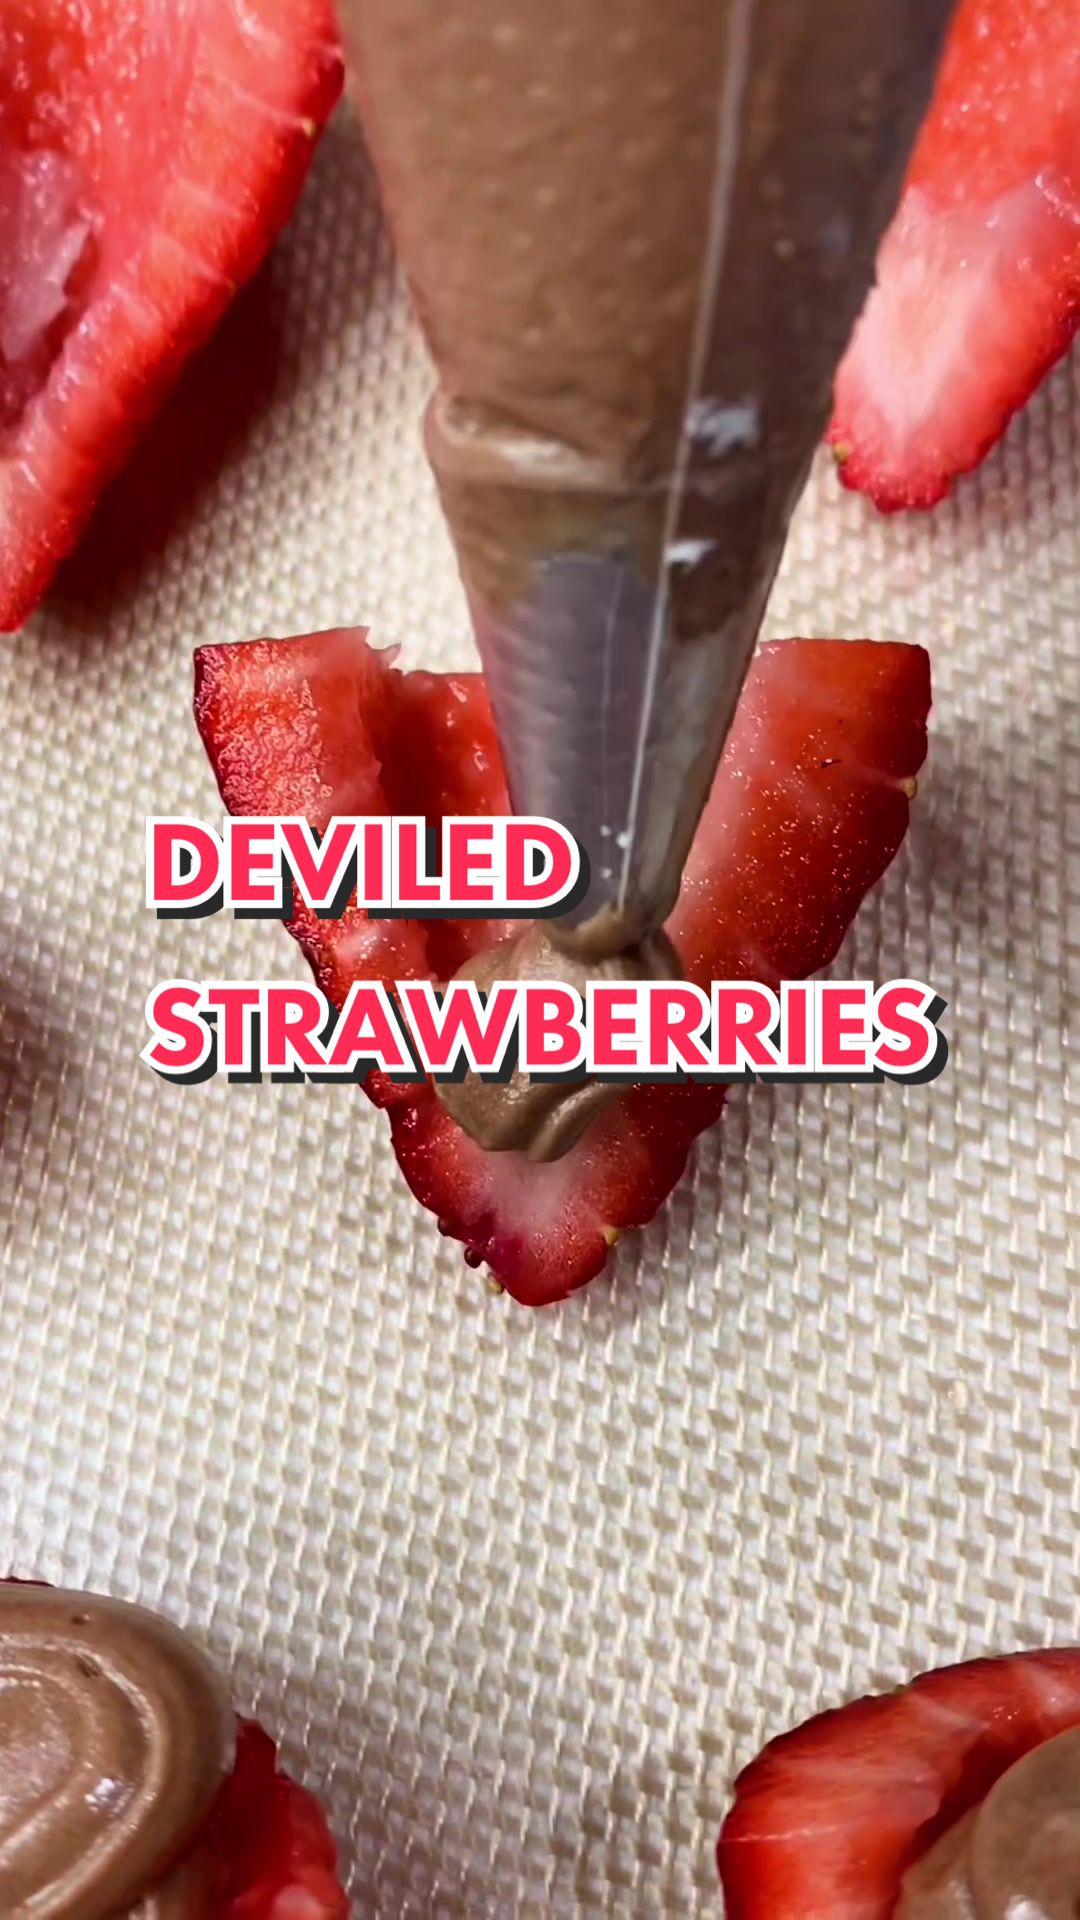 DEVILED STRAWBERRIES ARE EVERYTHING 🍓 #valentineseries #deviledstrawberries #easyrecipe #valentinesday2022 #winterolympics